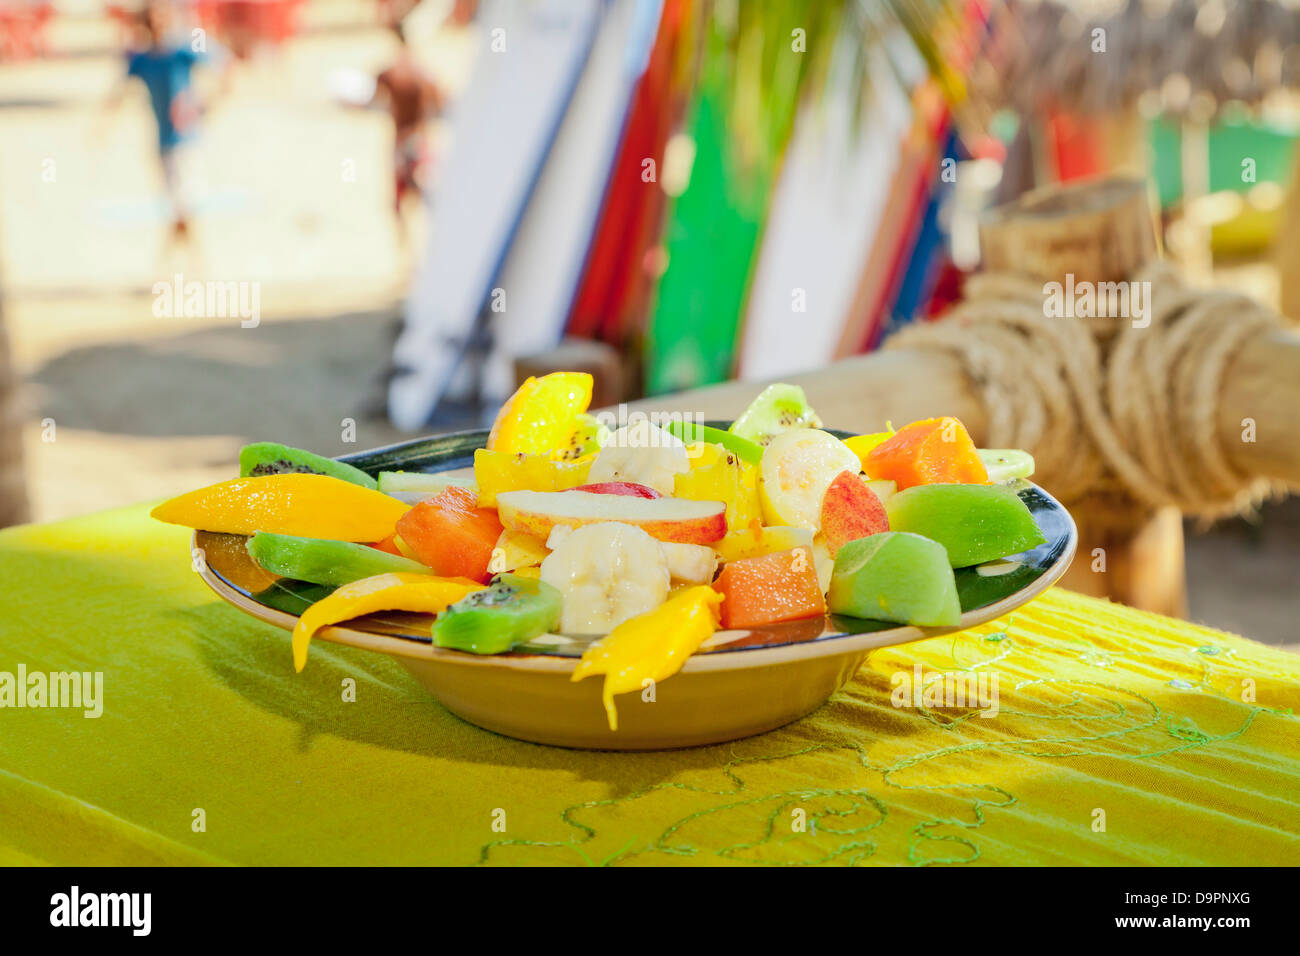 Plate of mexican food Stock Photo